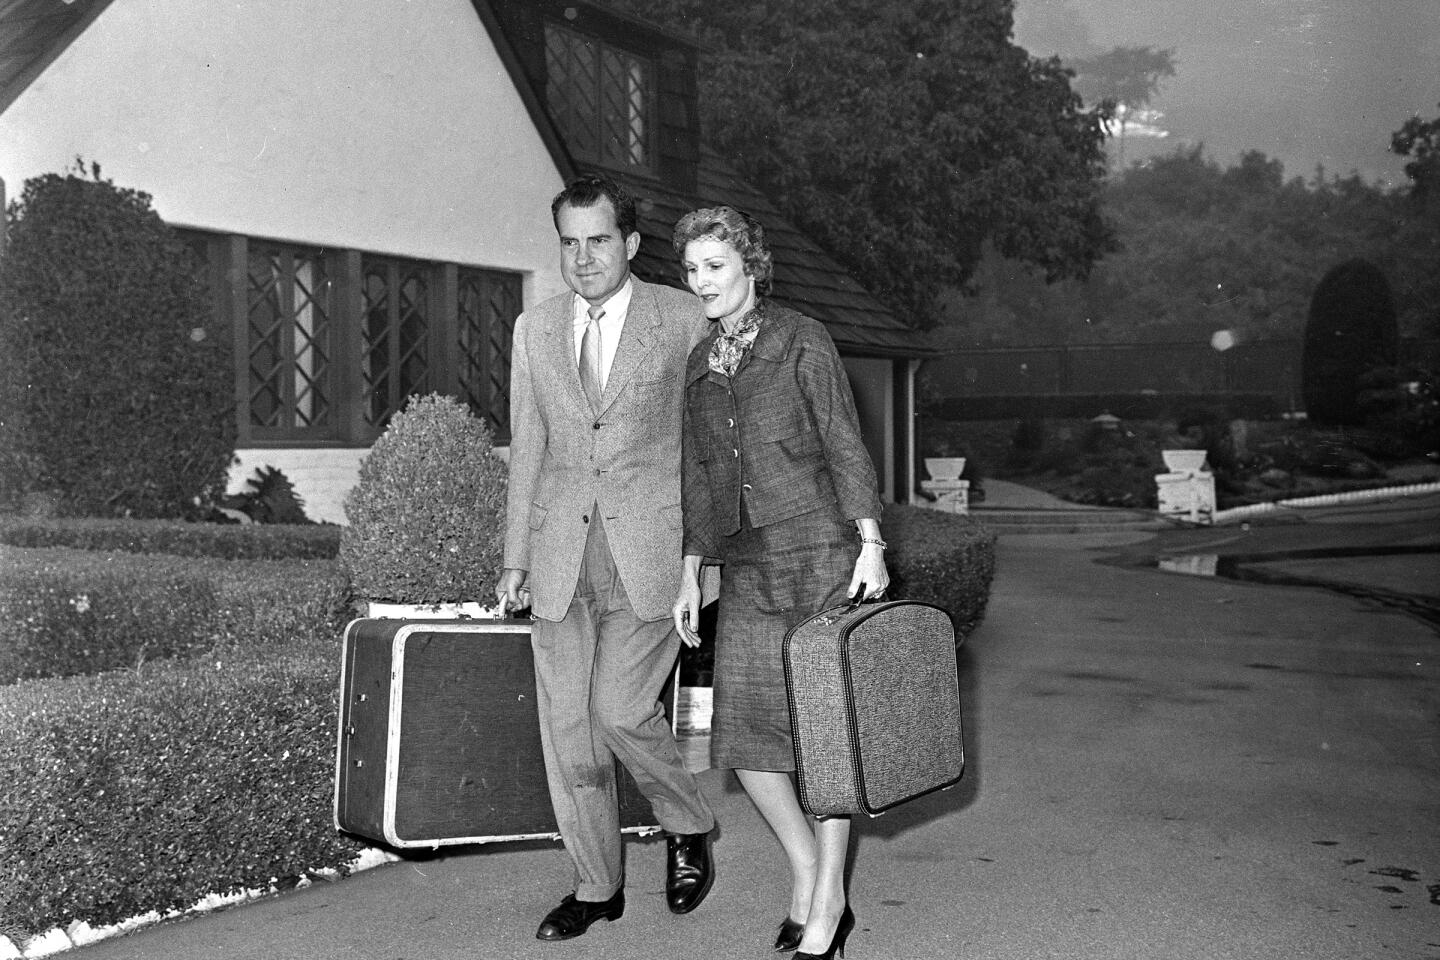 Richard and Pat Nixon carry suitcases as they evacuate their L.A. home during a fire